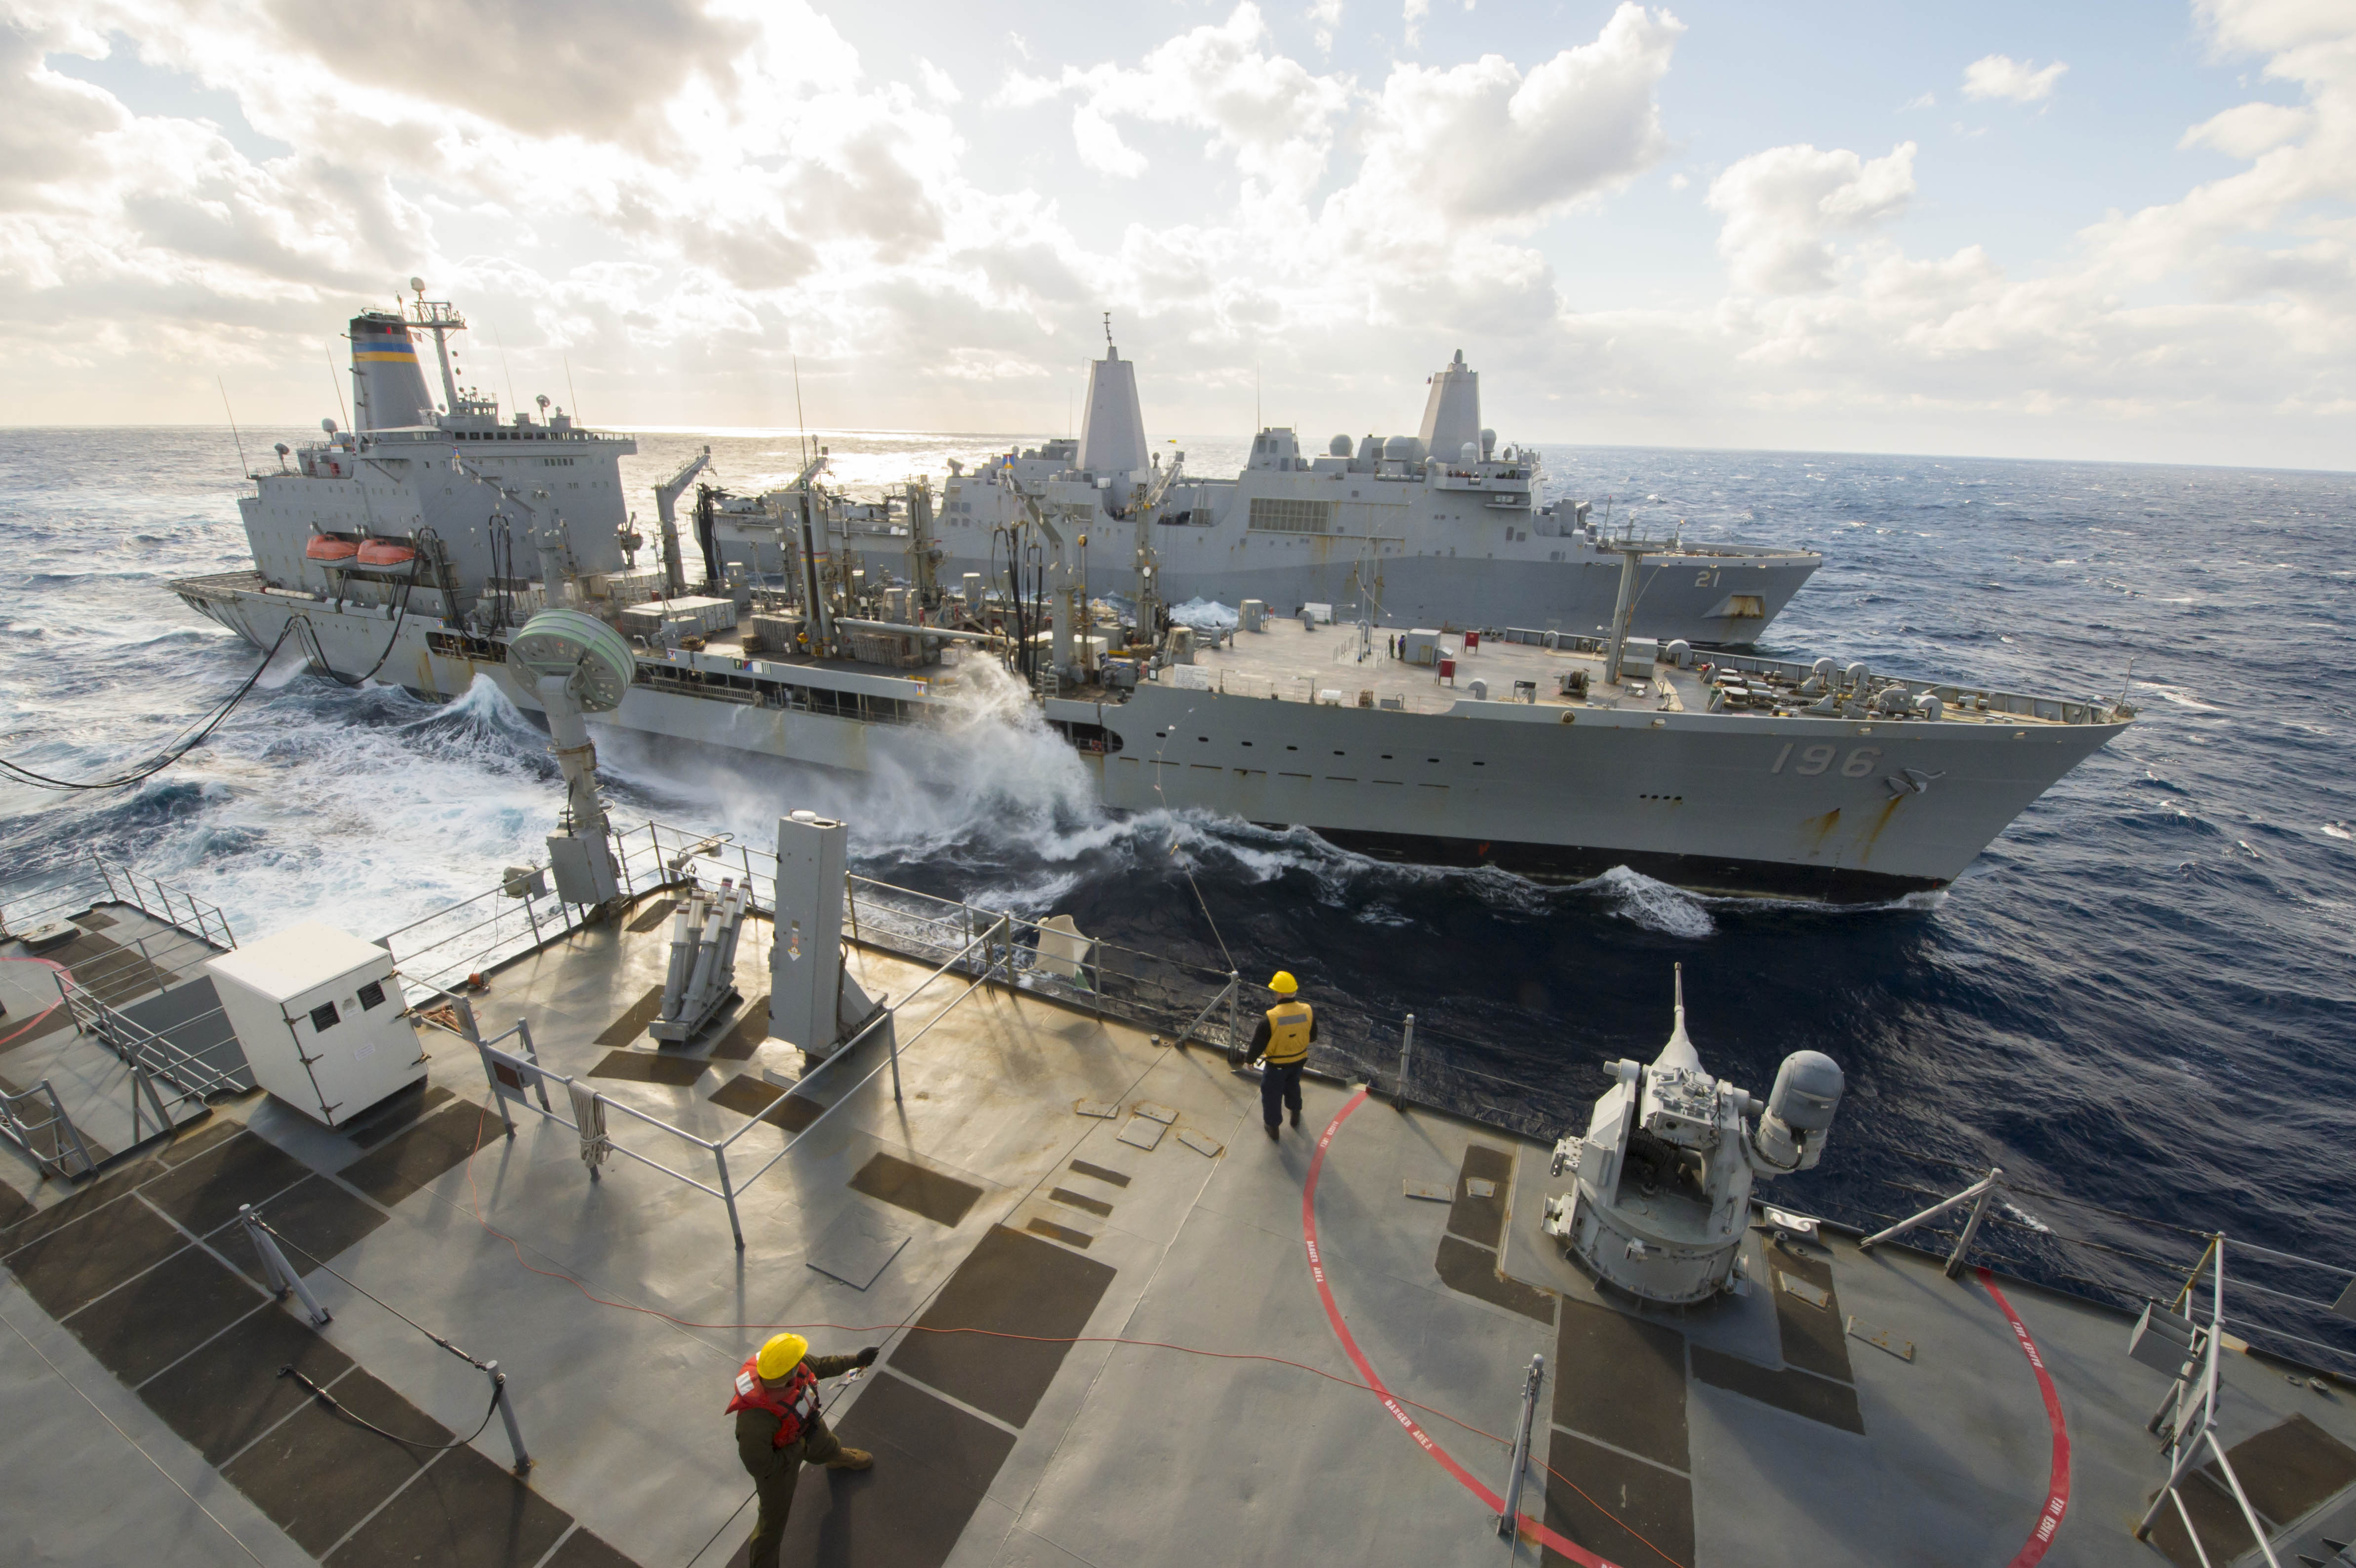 The Whidbey Island-class amphibious dock landing ship USS Fort McHenry (LSD 43), front, and the San Antonio-class amphibious transport dock USS New York (LPD 21), conduct an underway replenishment with the Military Sealift Command fleet replenishment oiler USNS Kanawha (T-AO-196) while operating in the Mediterranean Sea in January 2015. US Navy photo.